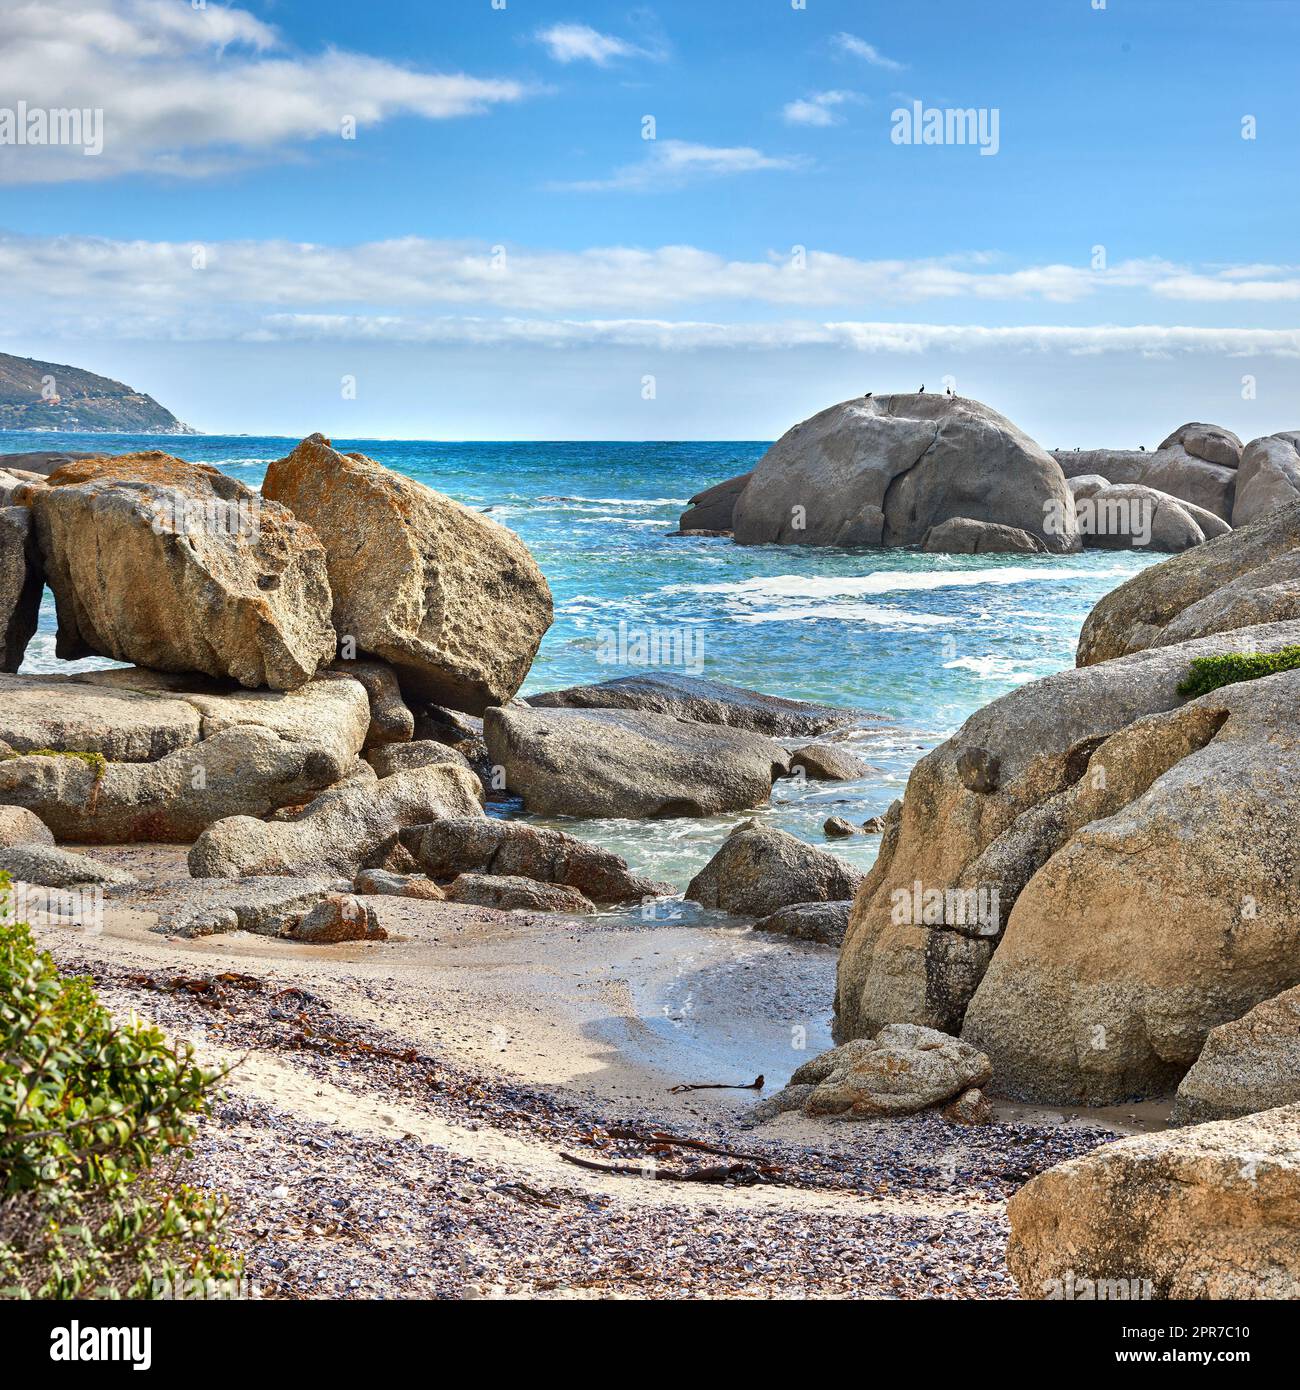 Landscape of beautiful large boulders in the ocean with a blue cloudy sky. Rock or granite structures shining under the sun near calm foamy waves at a popular beach location, Cape Town, South Africa Stock Photo